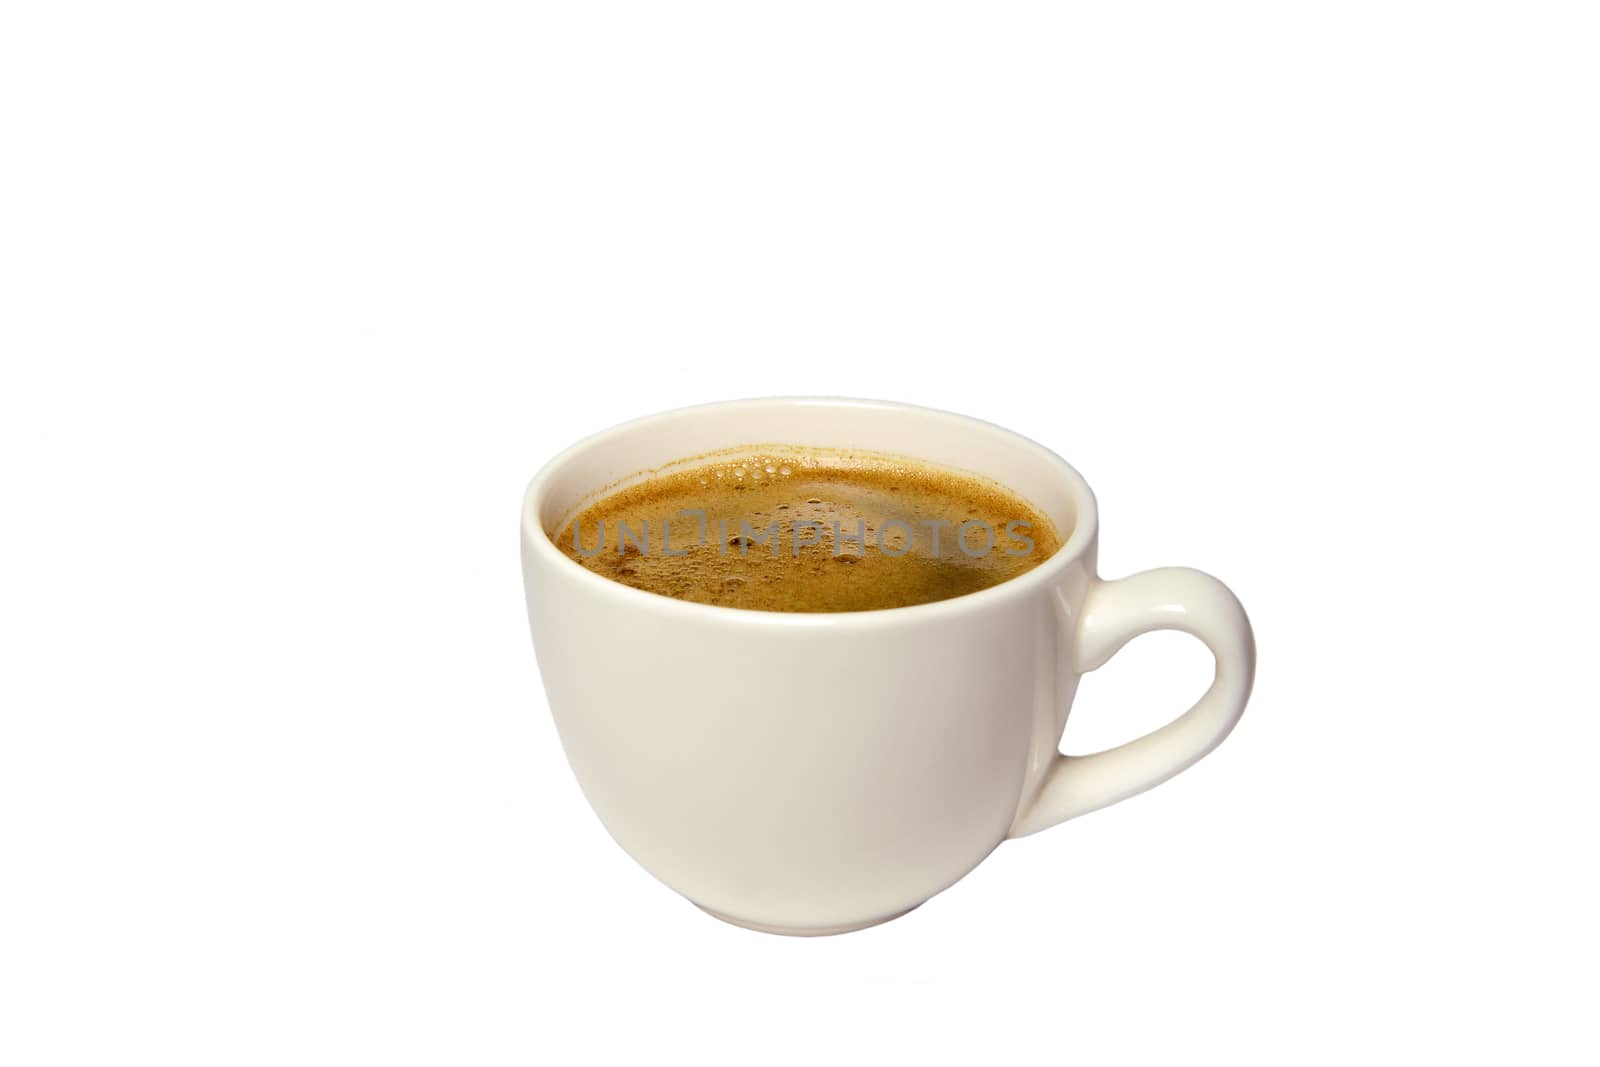 Photo of a cup of coffee. Beige color cup, isolated on white background. Food photography.